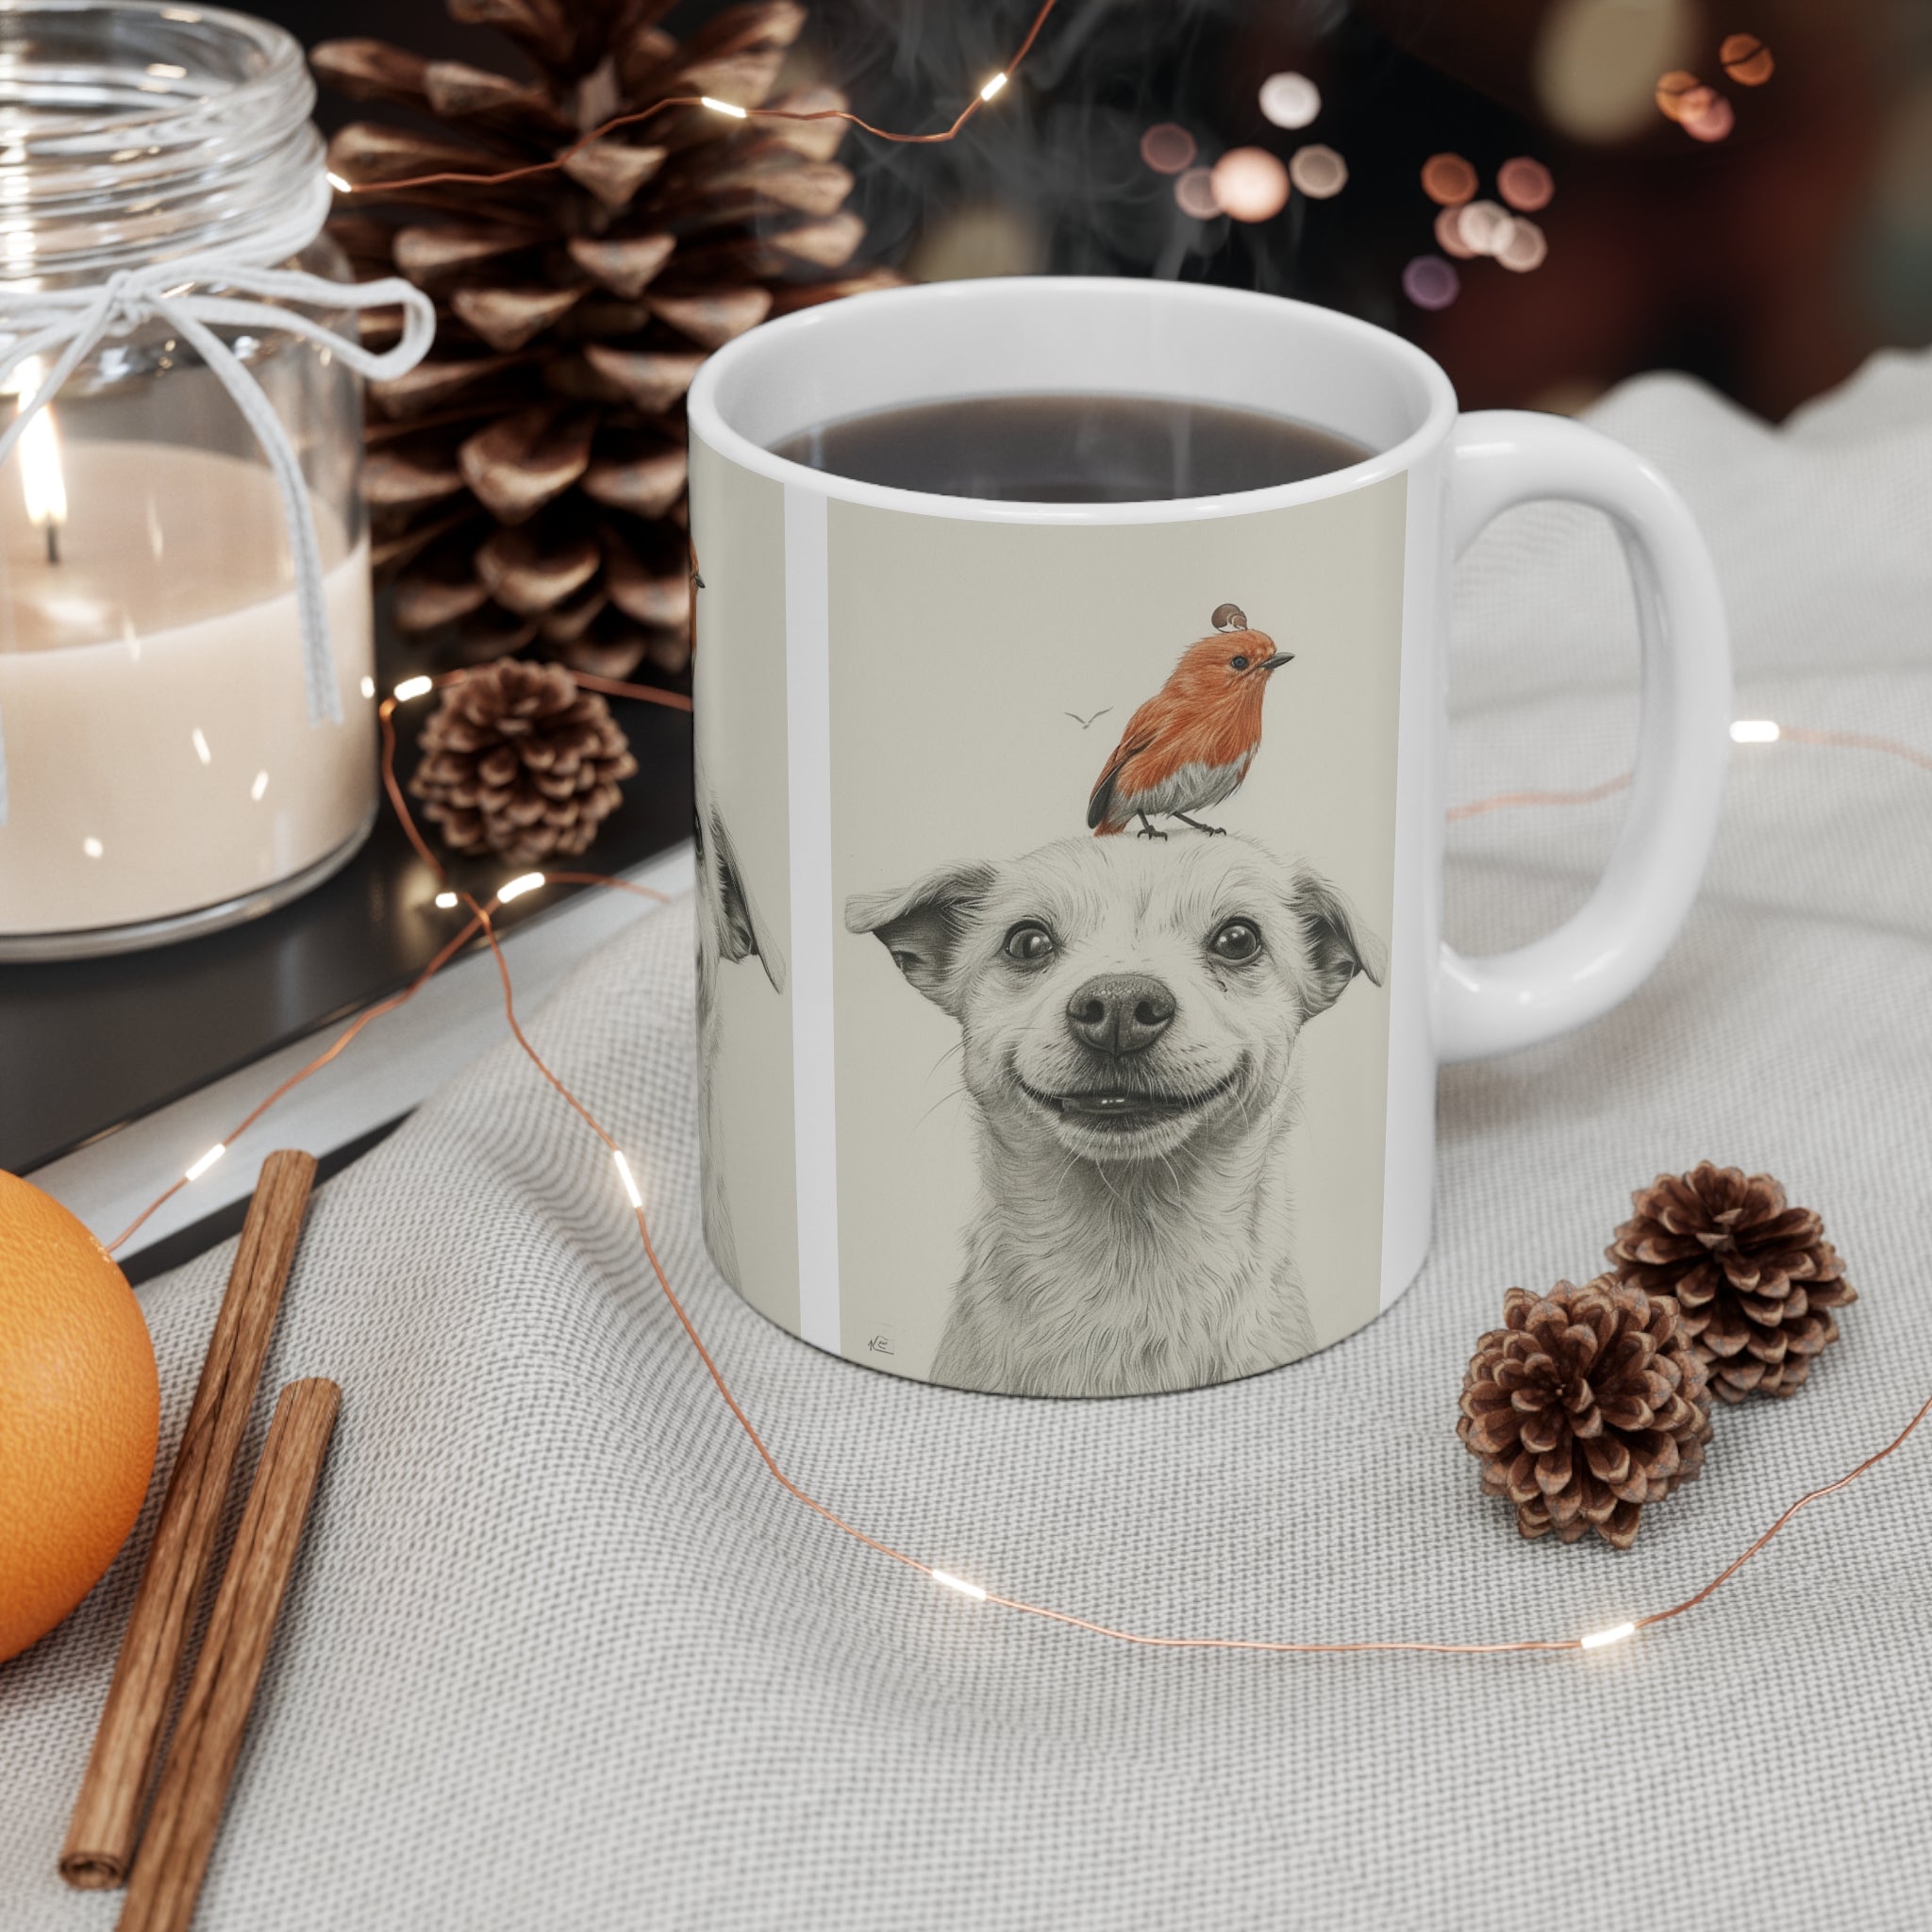 Enjoy Your Morning Brew with Canine and Avian Companionship - Dog and Bird Sidekick Ceramic Mug 11oz for Coffee Lovers